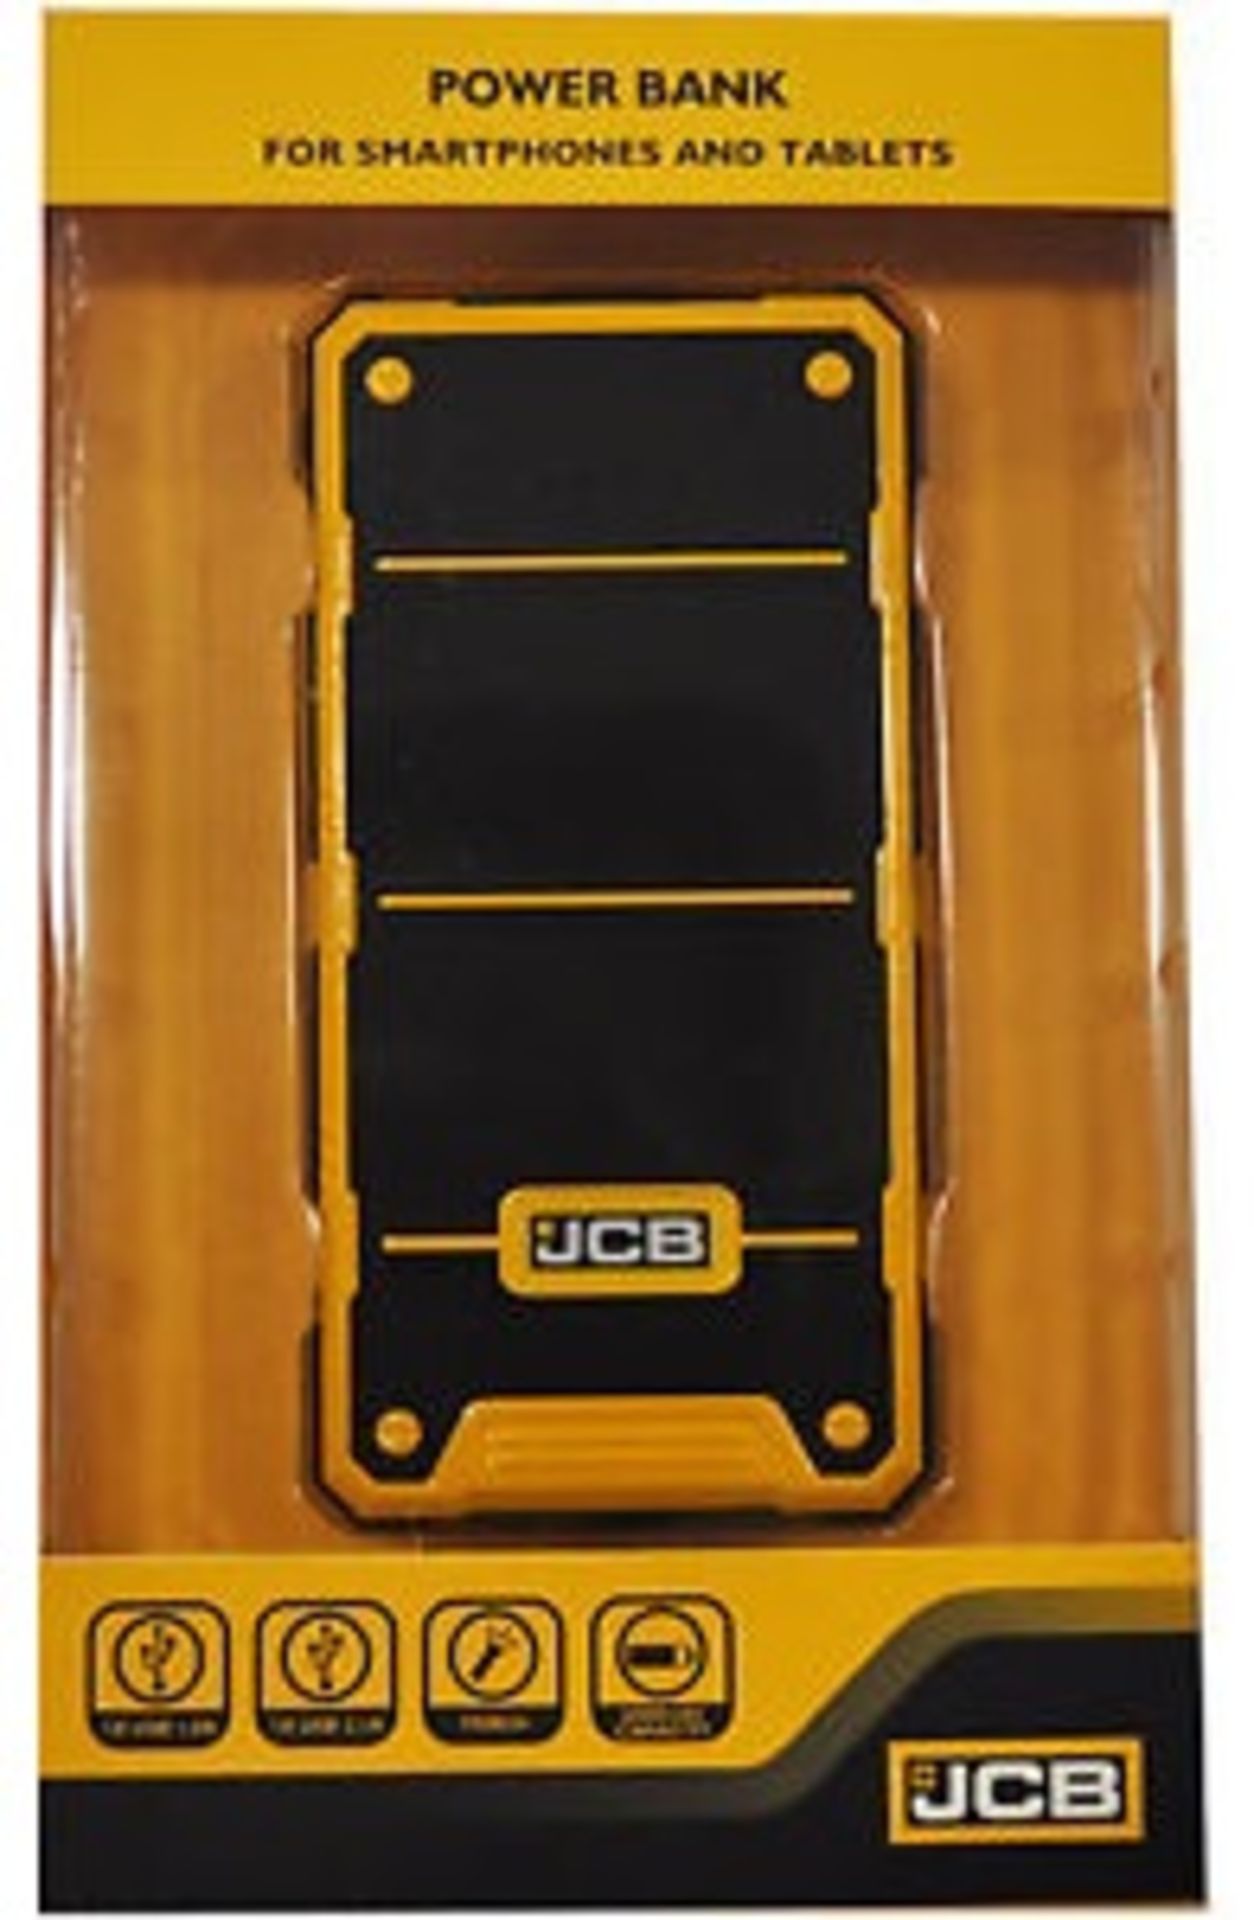 V *TRADE QTY* Brand New JCB 6000mAh Power Bank with 2 x USB Ports (1 x 1.0A and 1 x 2.1A) Overcharge